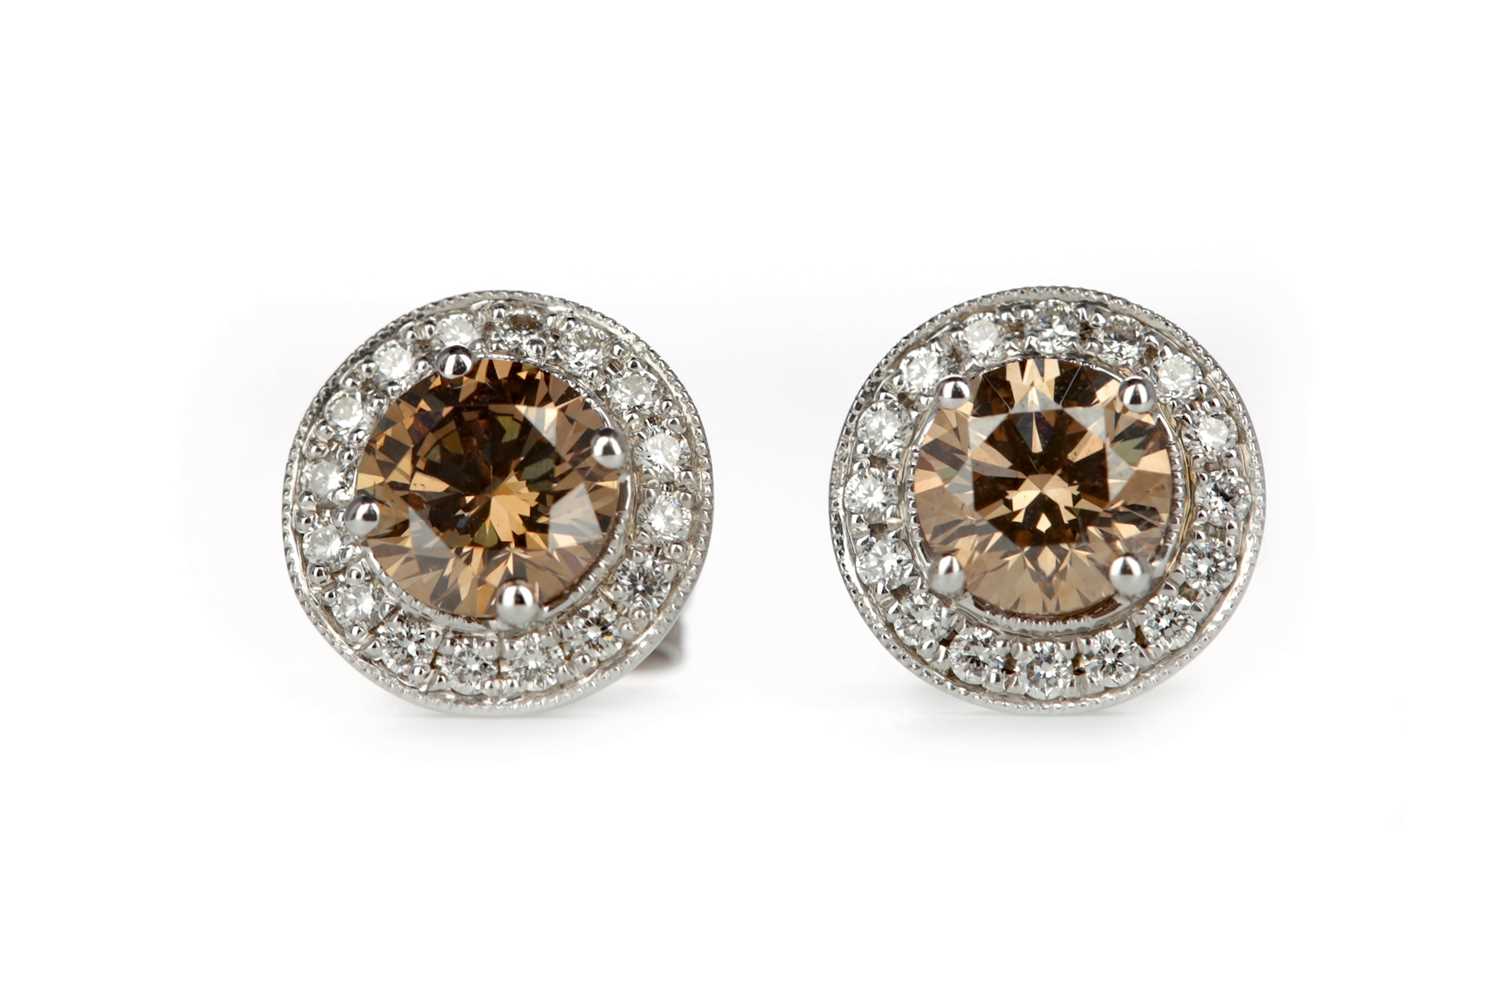 Lot 405 - A PAIR OF CERTIFICATED DIAMOND EARRINGS